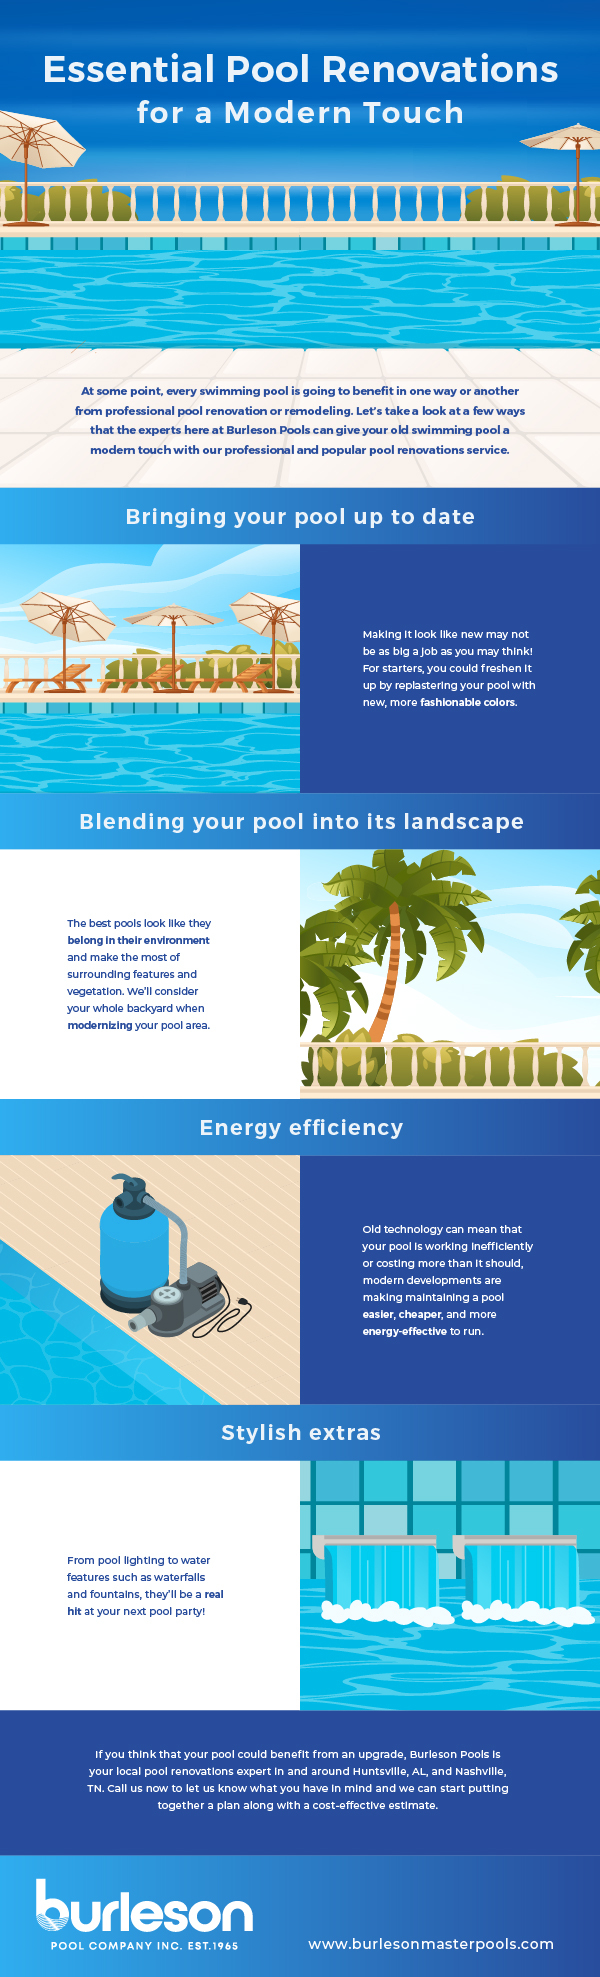 Essential Pool Renovations for a Modern Touch (Infographic)